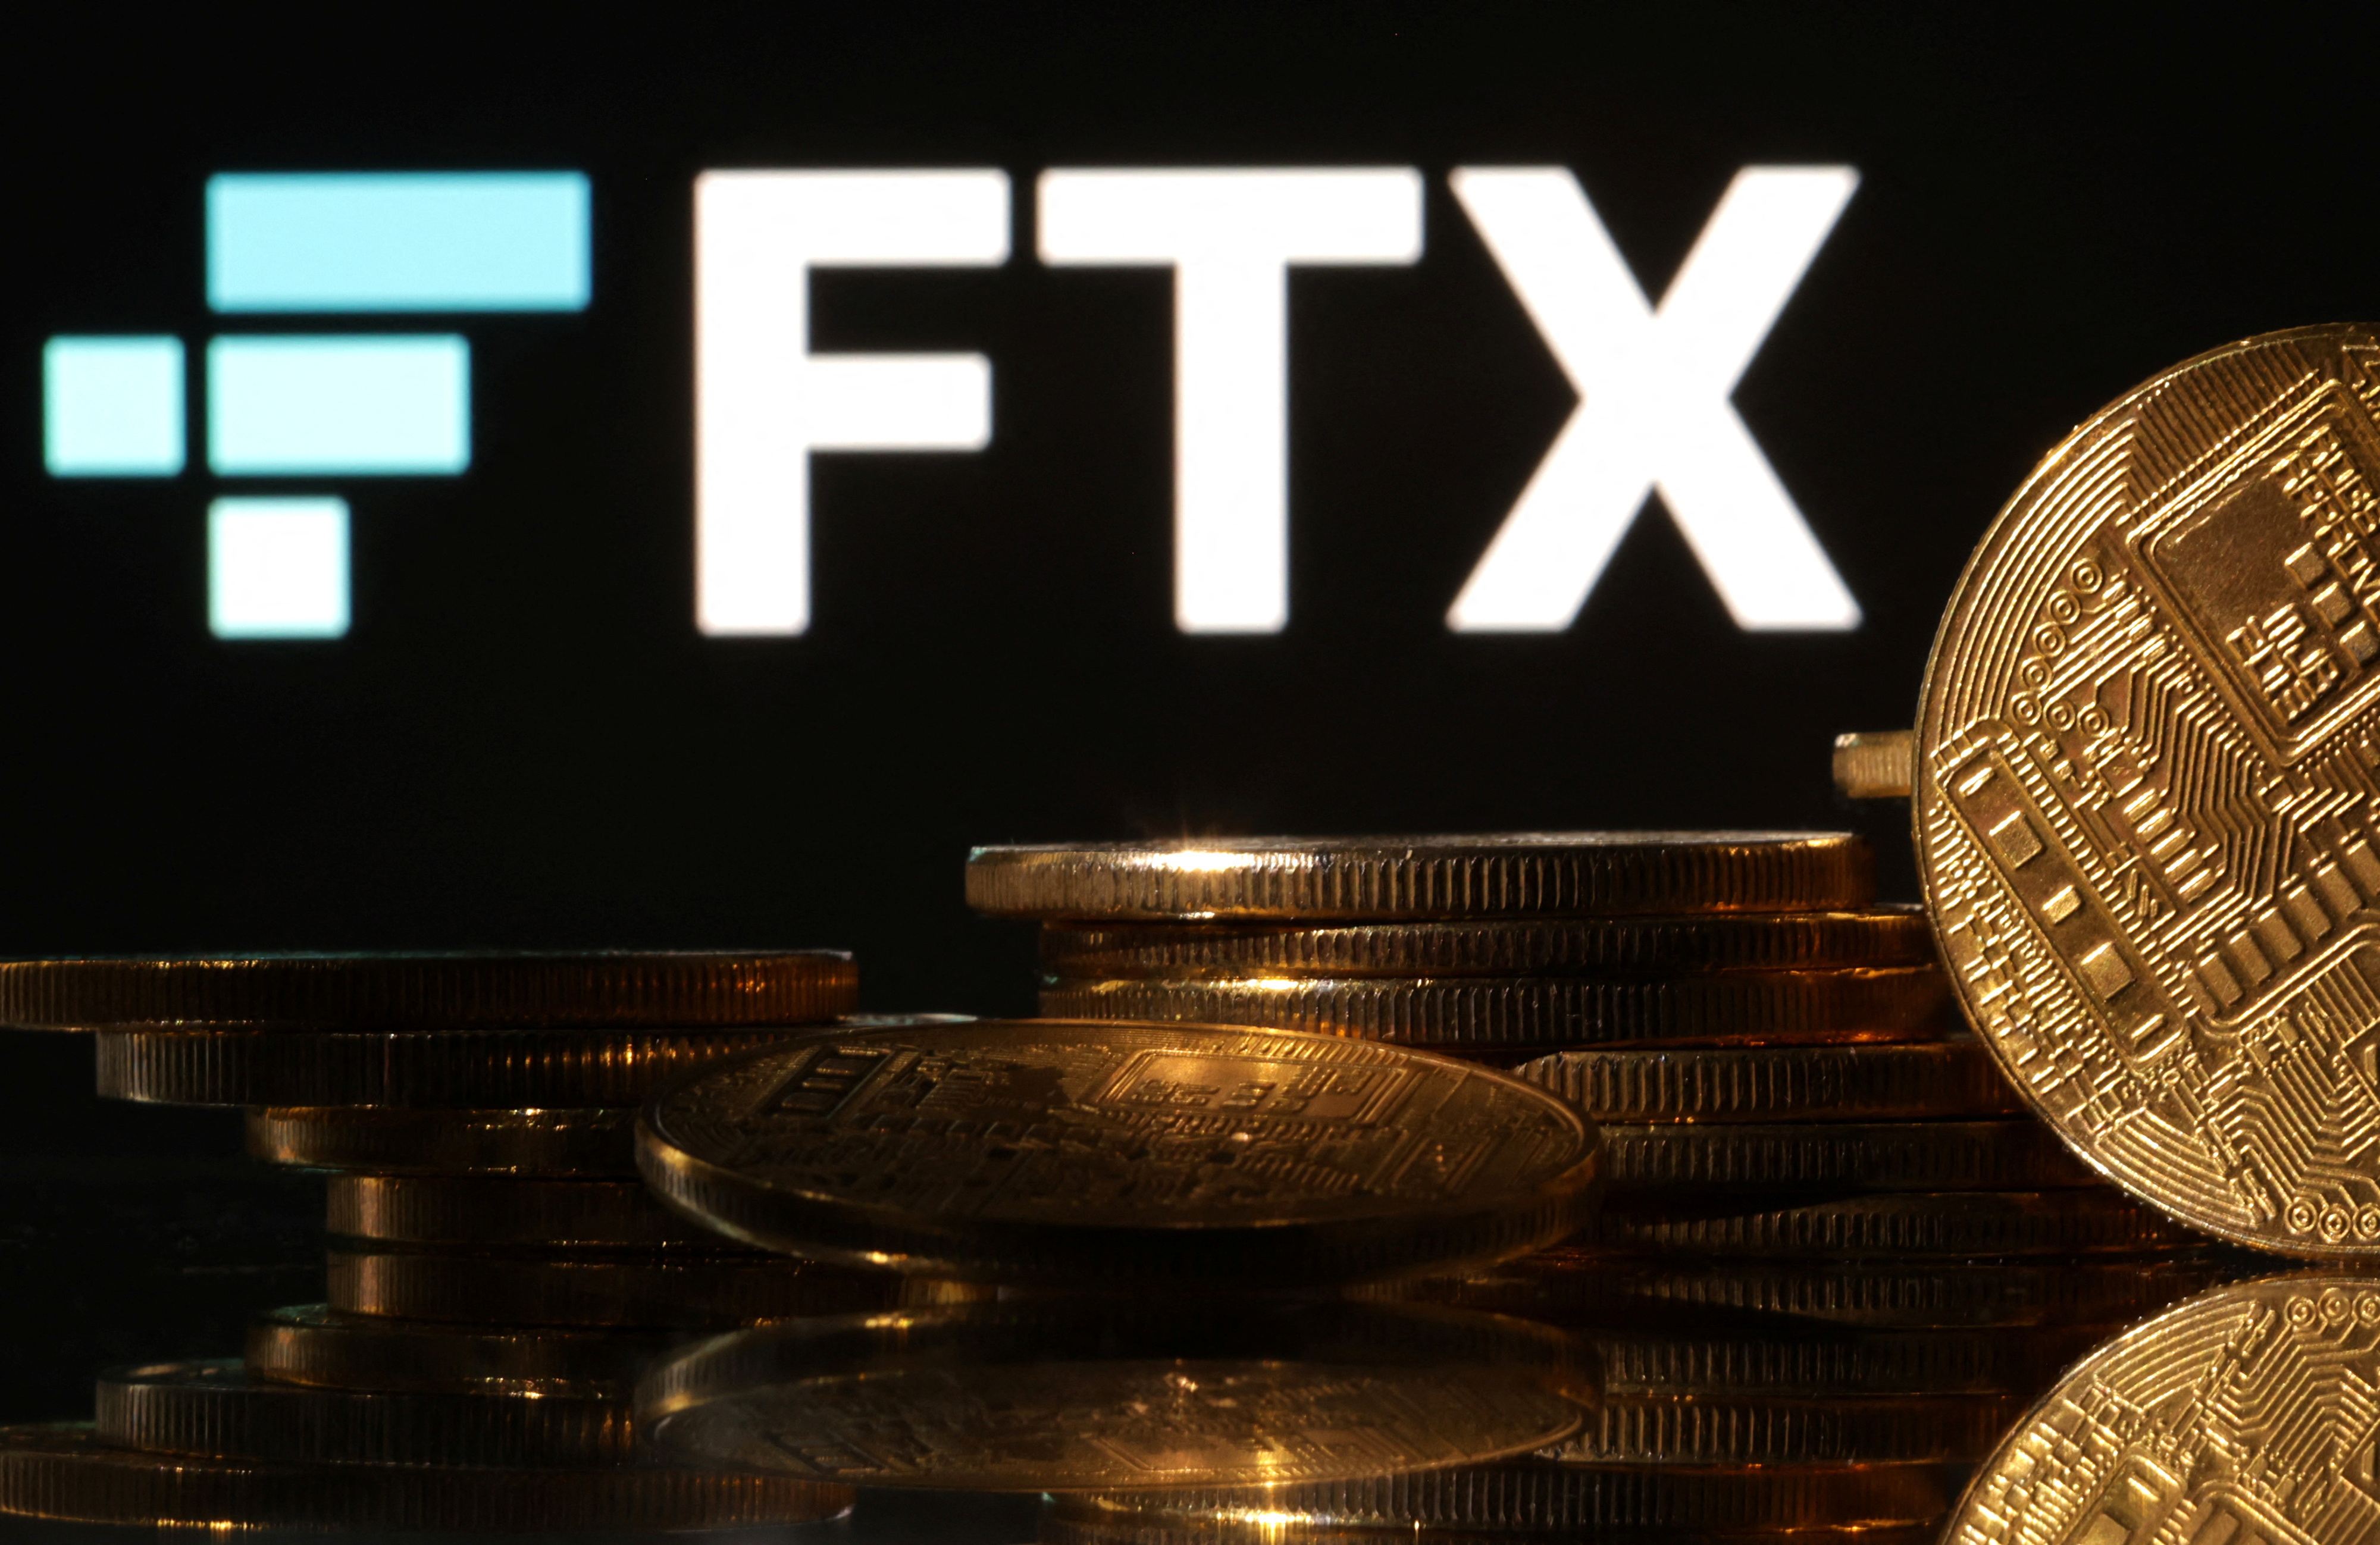 The illustration shows the FTX logo and the representation of cryptocurrencies